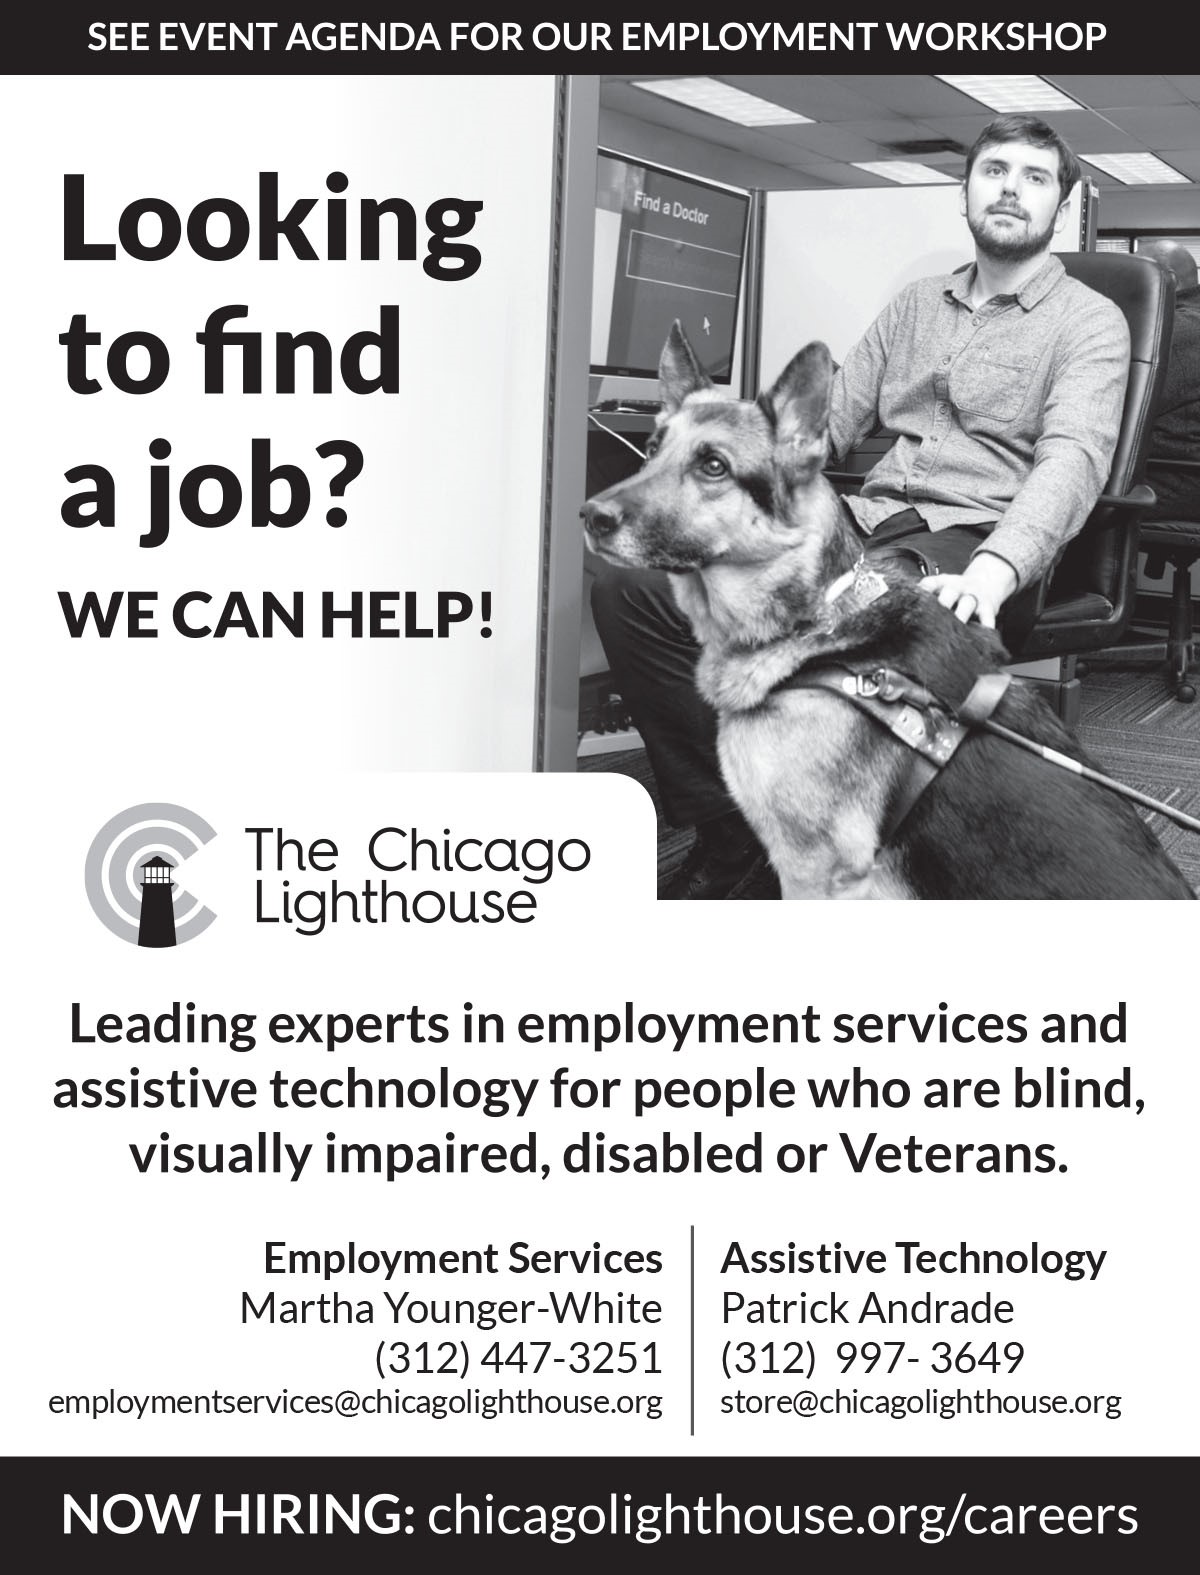 The Chicago Lighthouse See event agenda for our employment workshop. Looking for a job? We can help! Leading experts in employment services and assistive technology for people who are blind, visually impaired, disabled or veterans.  Employment Services: Martha Younger-White 312-447-3251 | employmentservices@chicagolighthouse.org. Assistive Technology: Patrick Andrade 312-997-3649 | store@chicagolighthouse.org. NOW HIRING: chicagolighthouse.org/careers. 